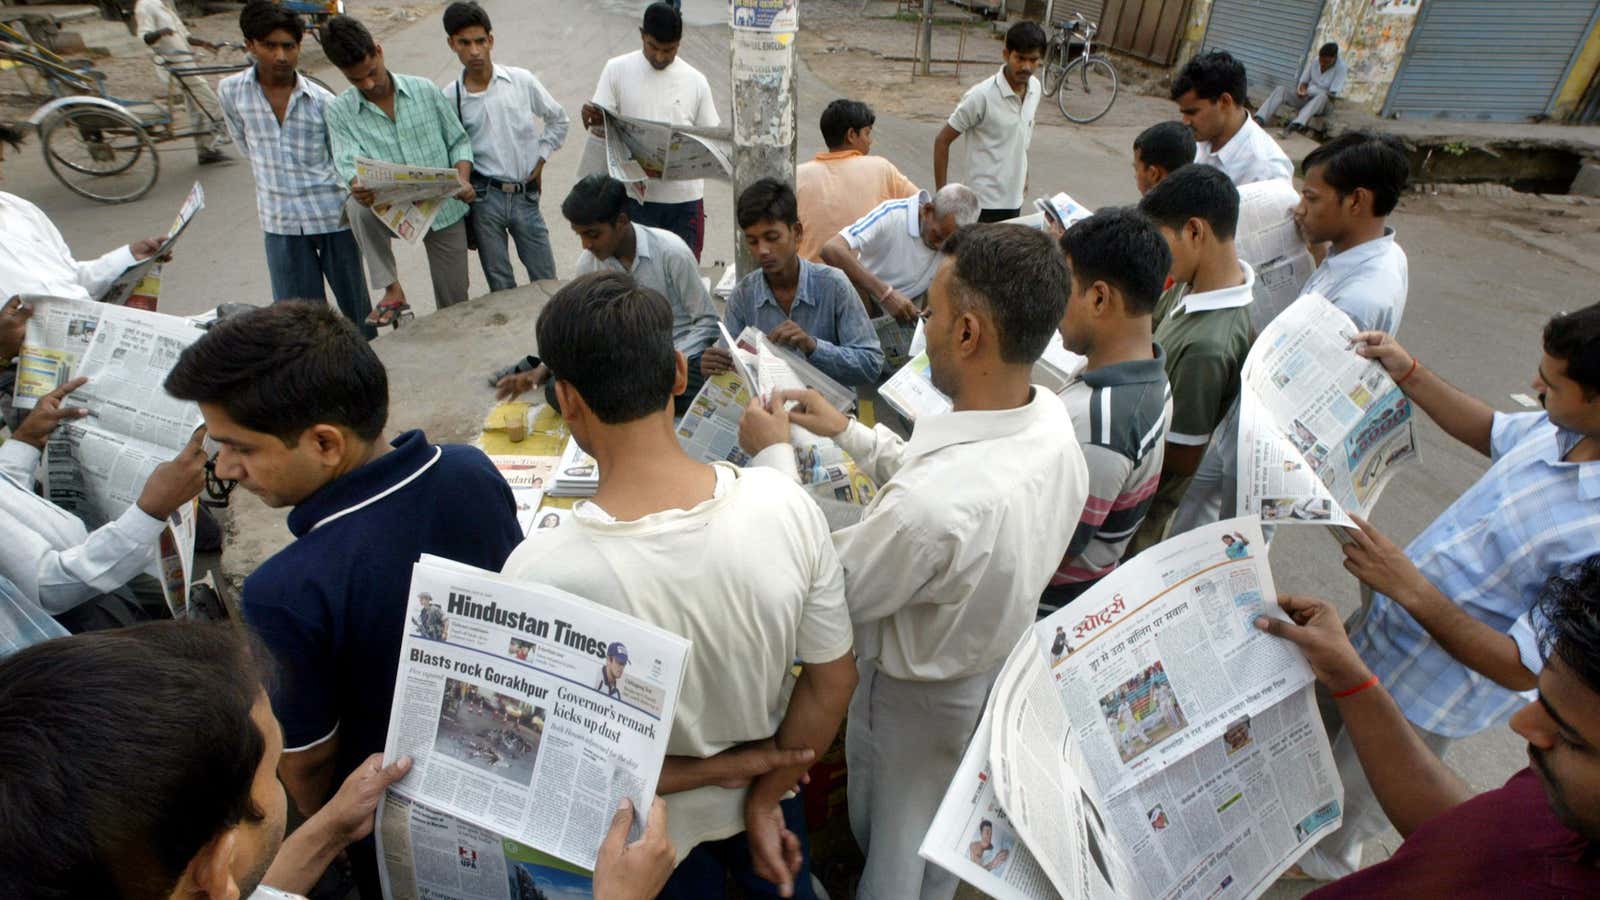 India has 94,067 newspapers